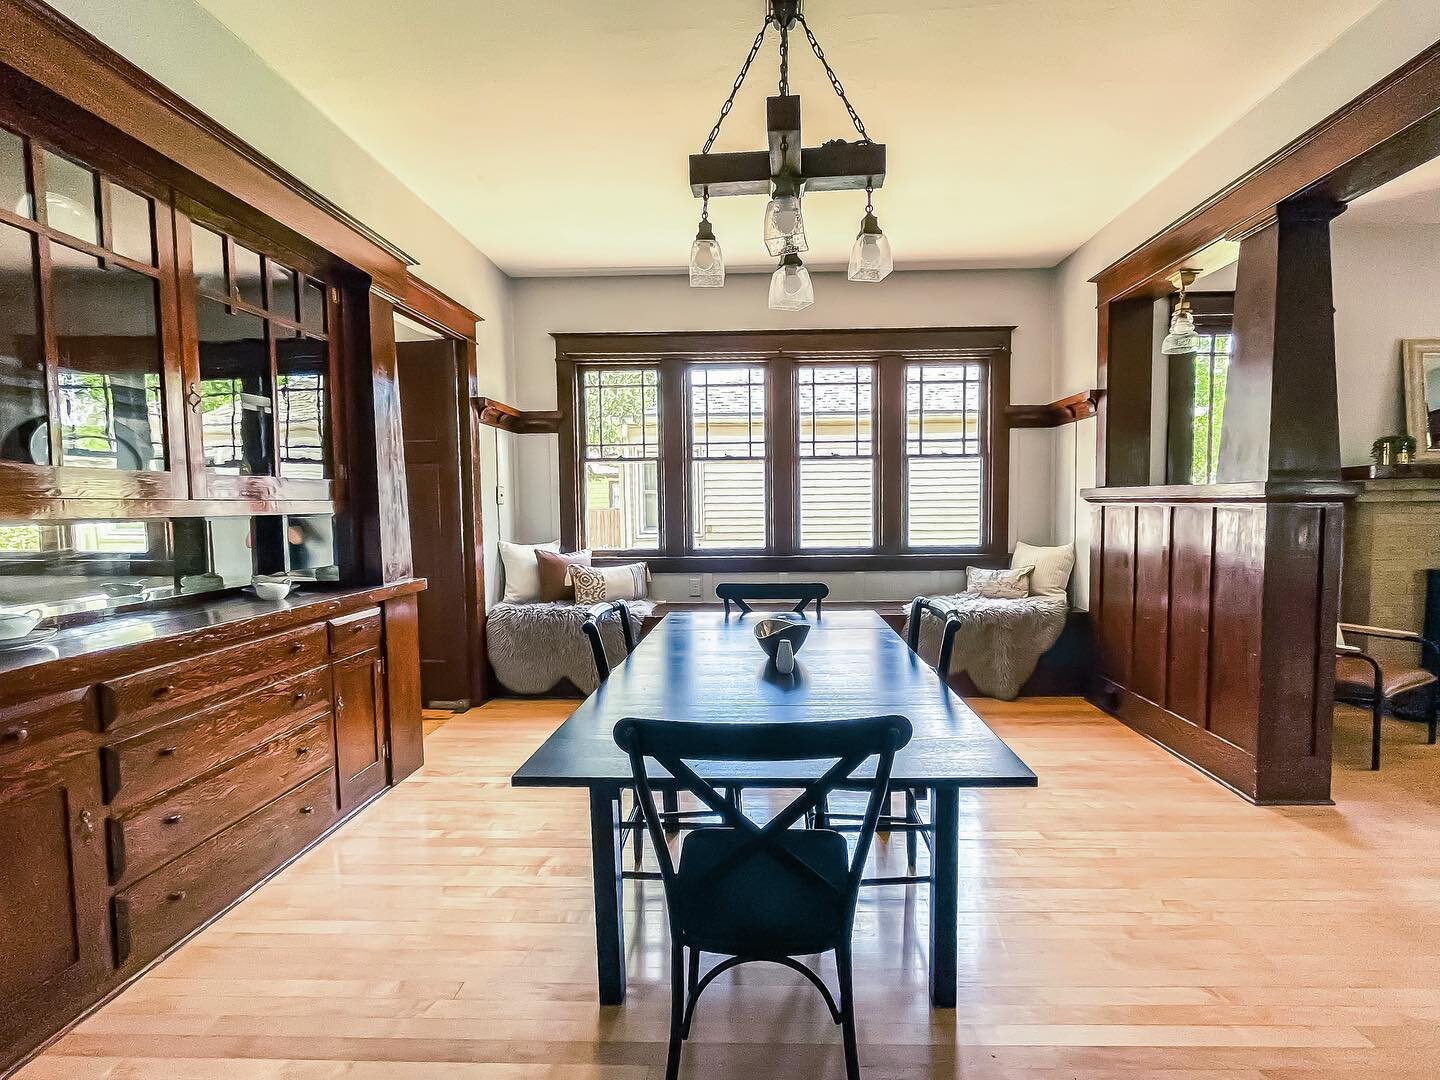 How much do you love the original woodwork and light fixtures in the dining room of this craftsman home? &hearts;️